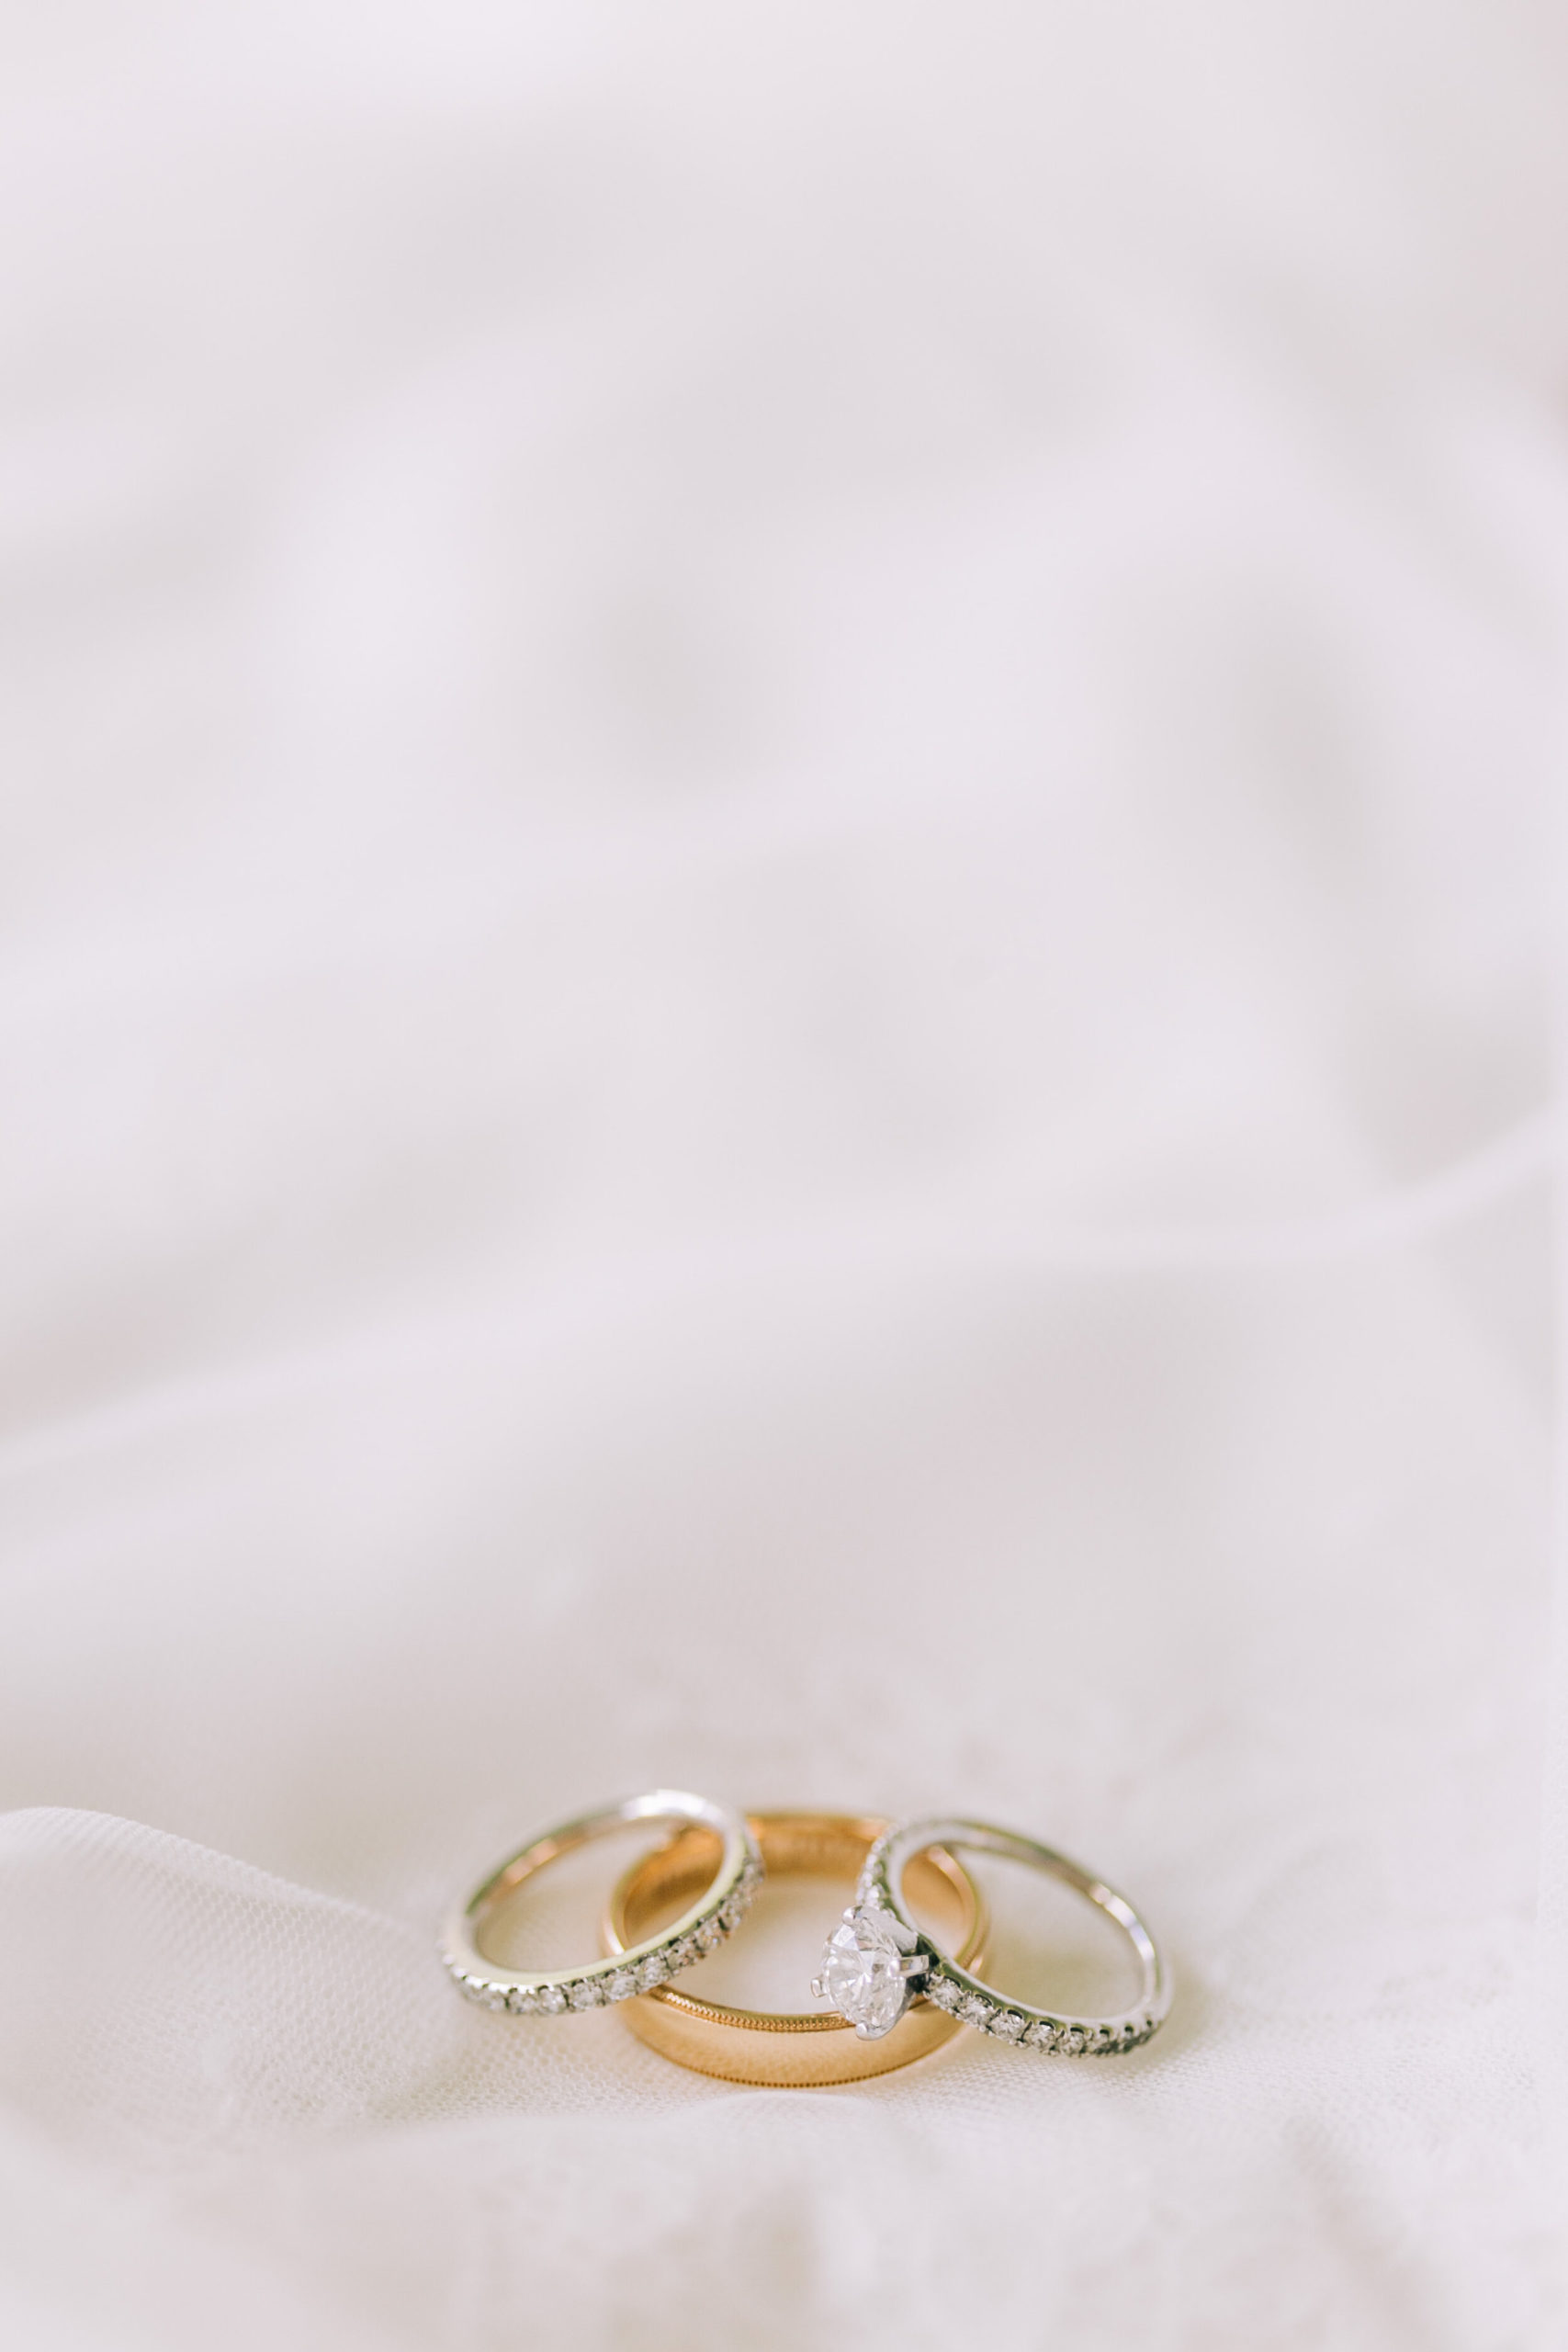 silver and gold wedding bands in knoxville tn